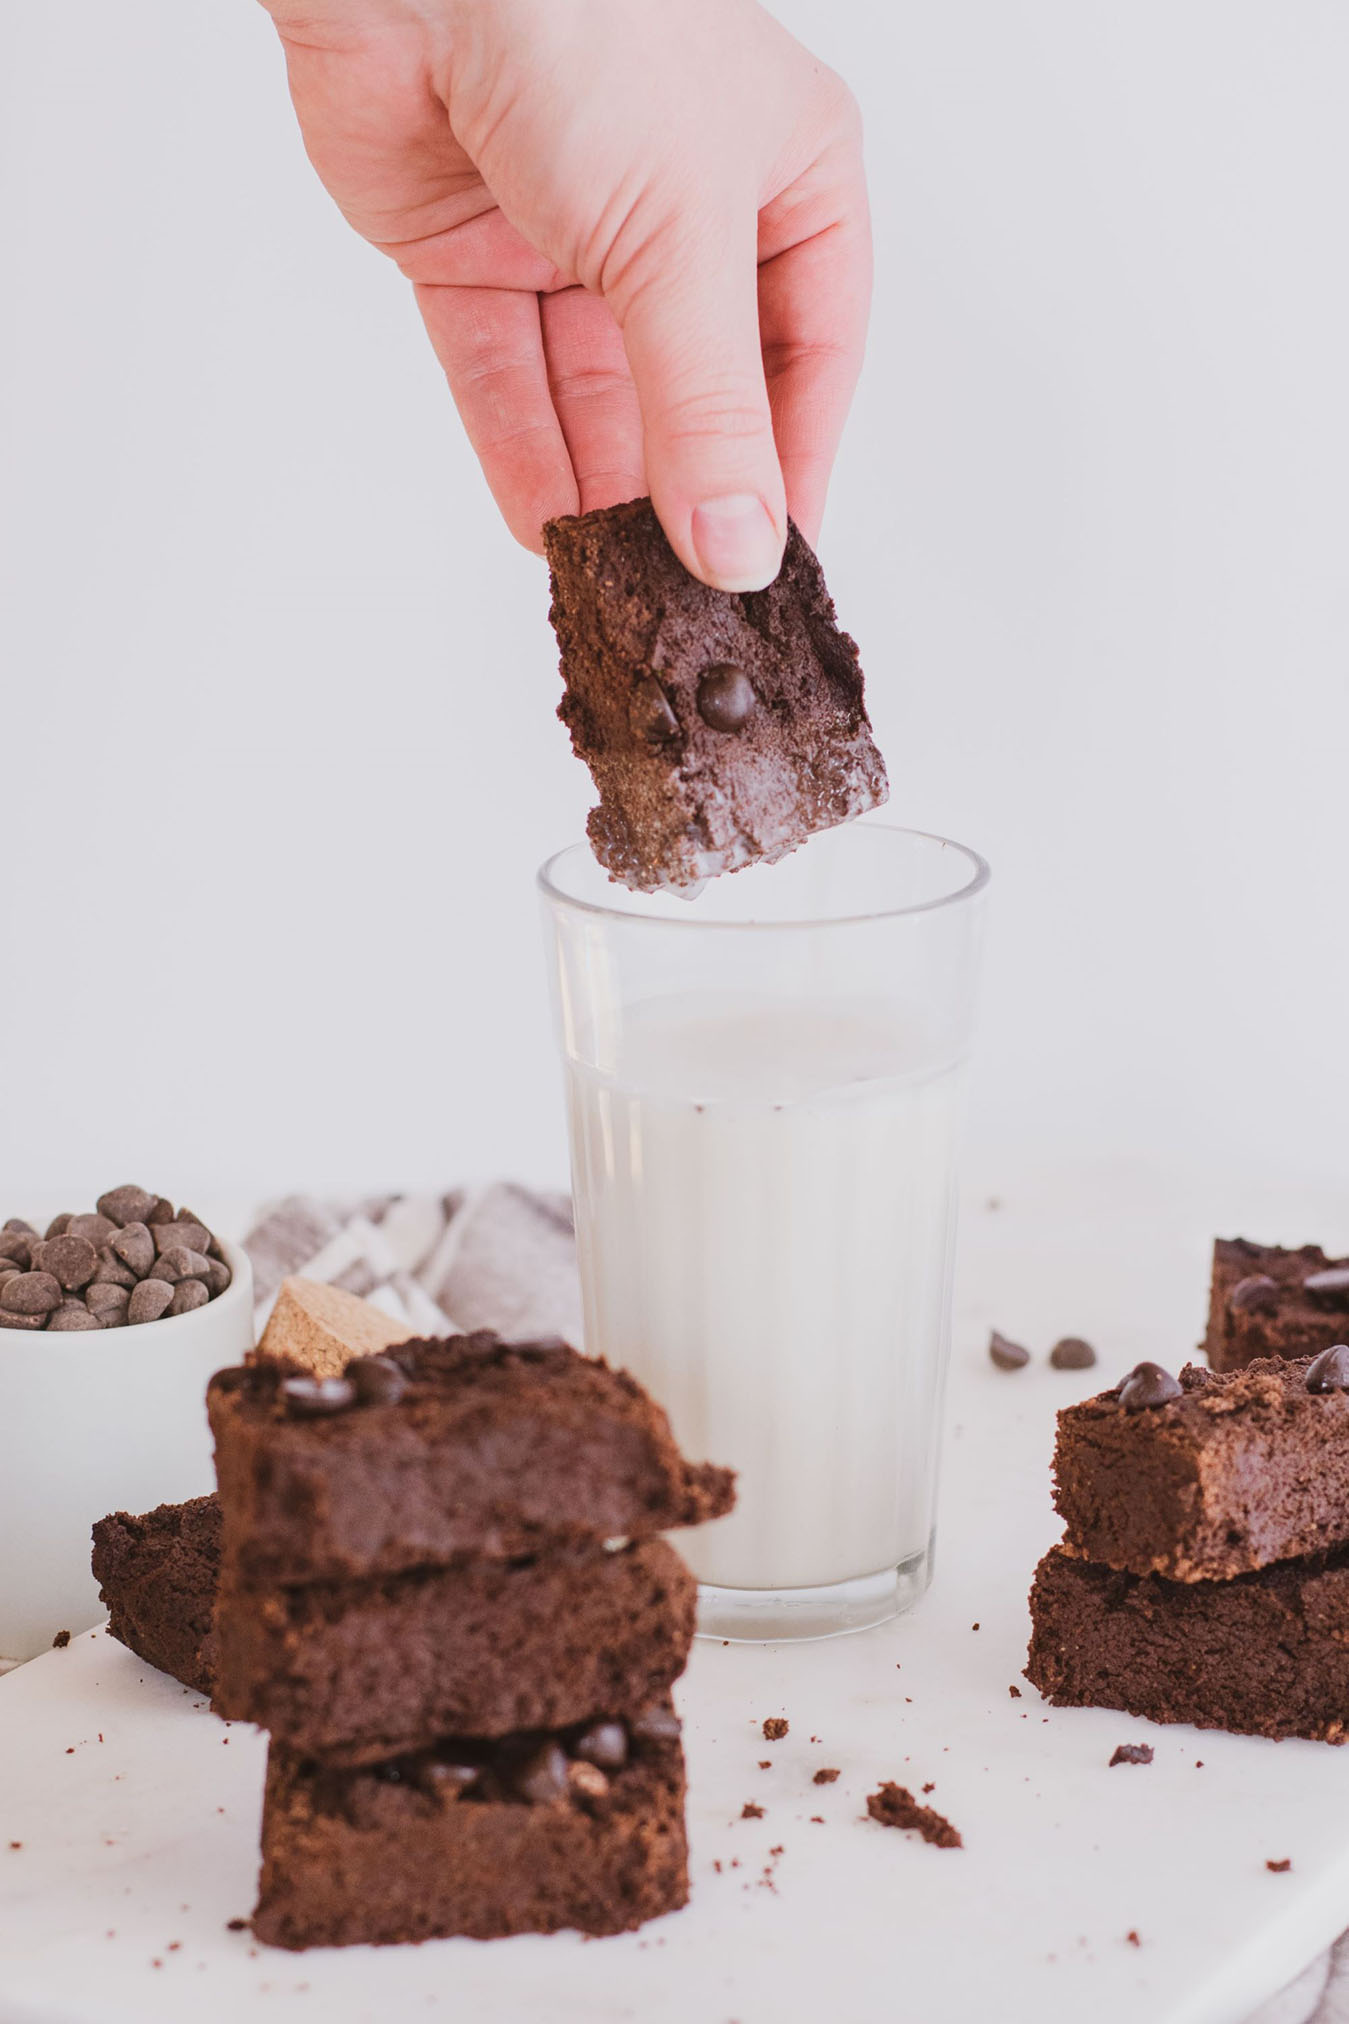 Keto Avocado Brownie being dipped in some Almond Milk